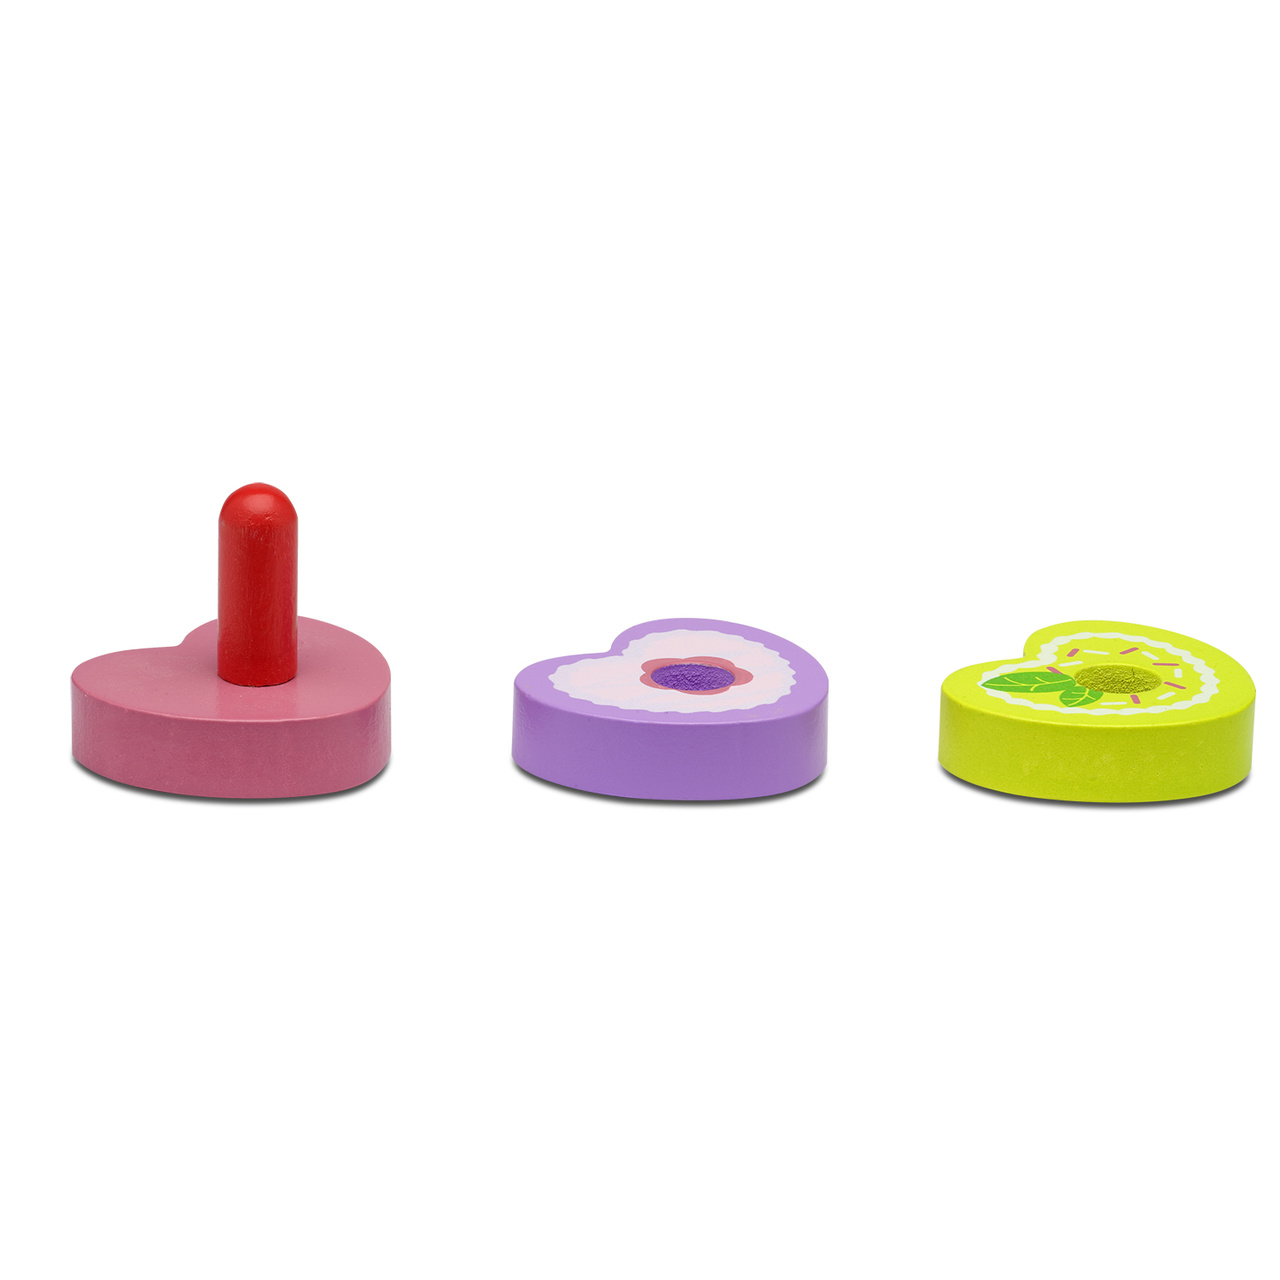 Outlet micki cake stand with toy cakes